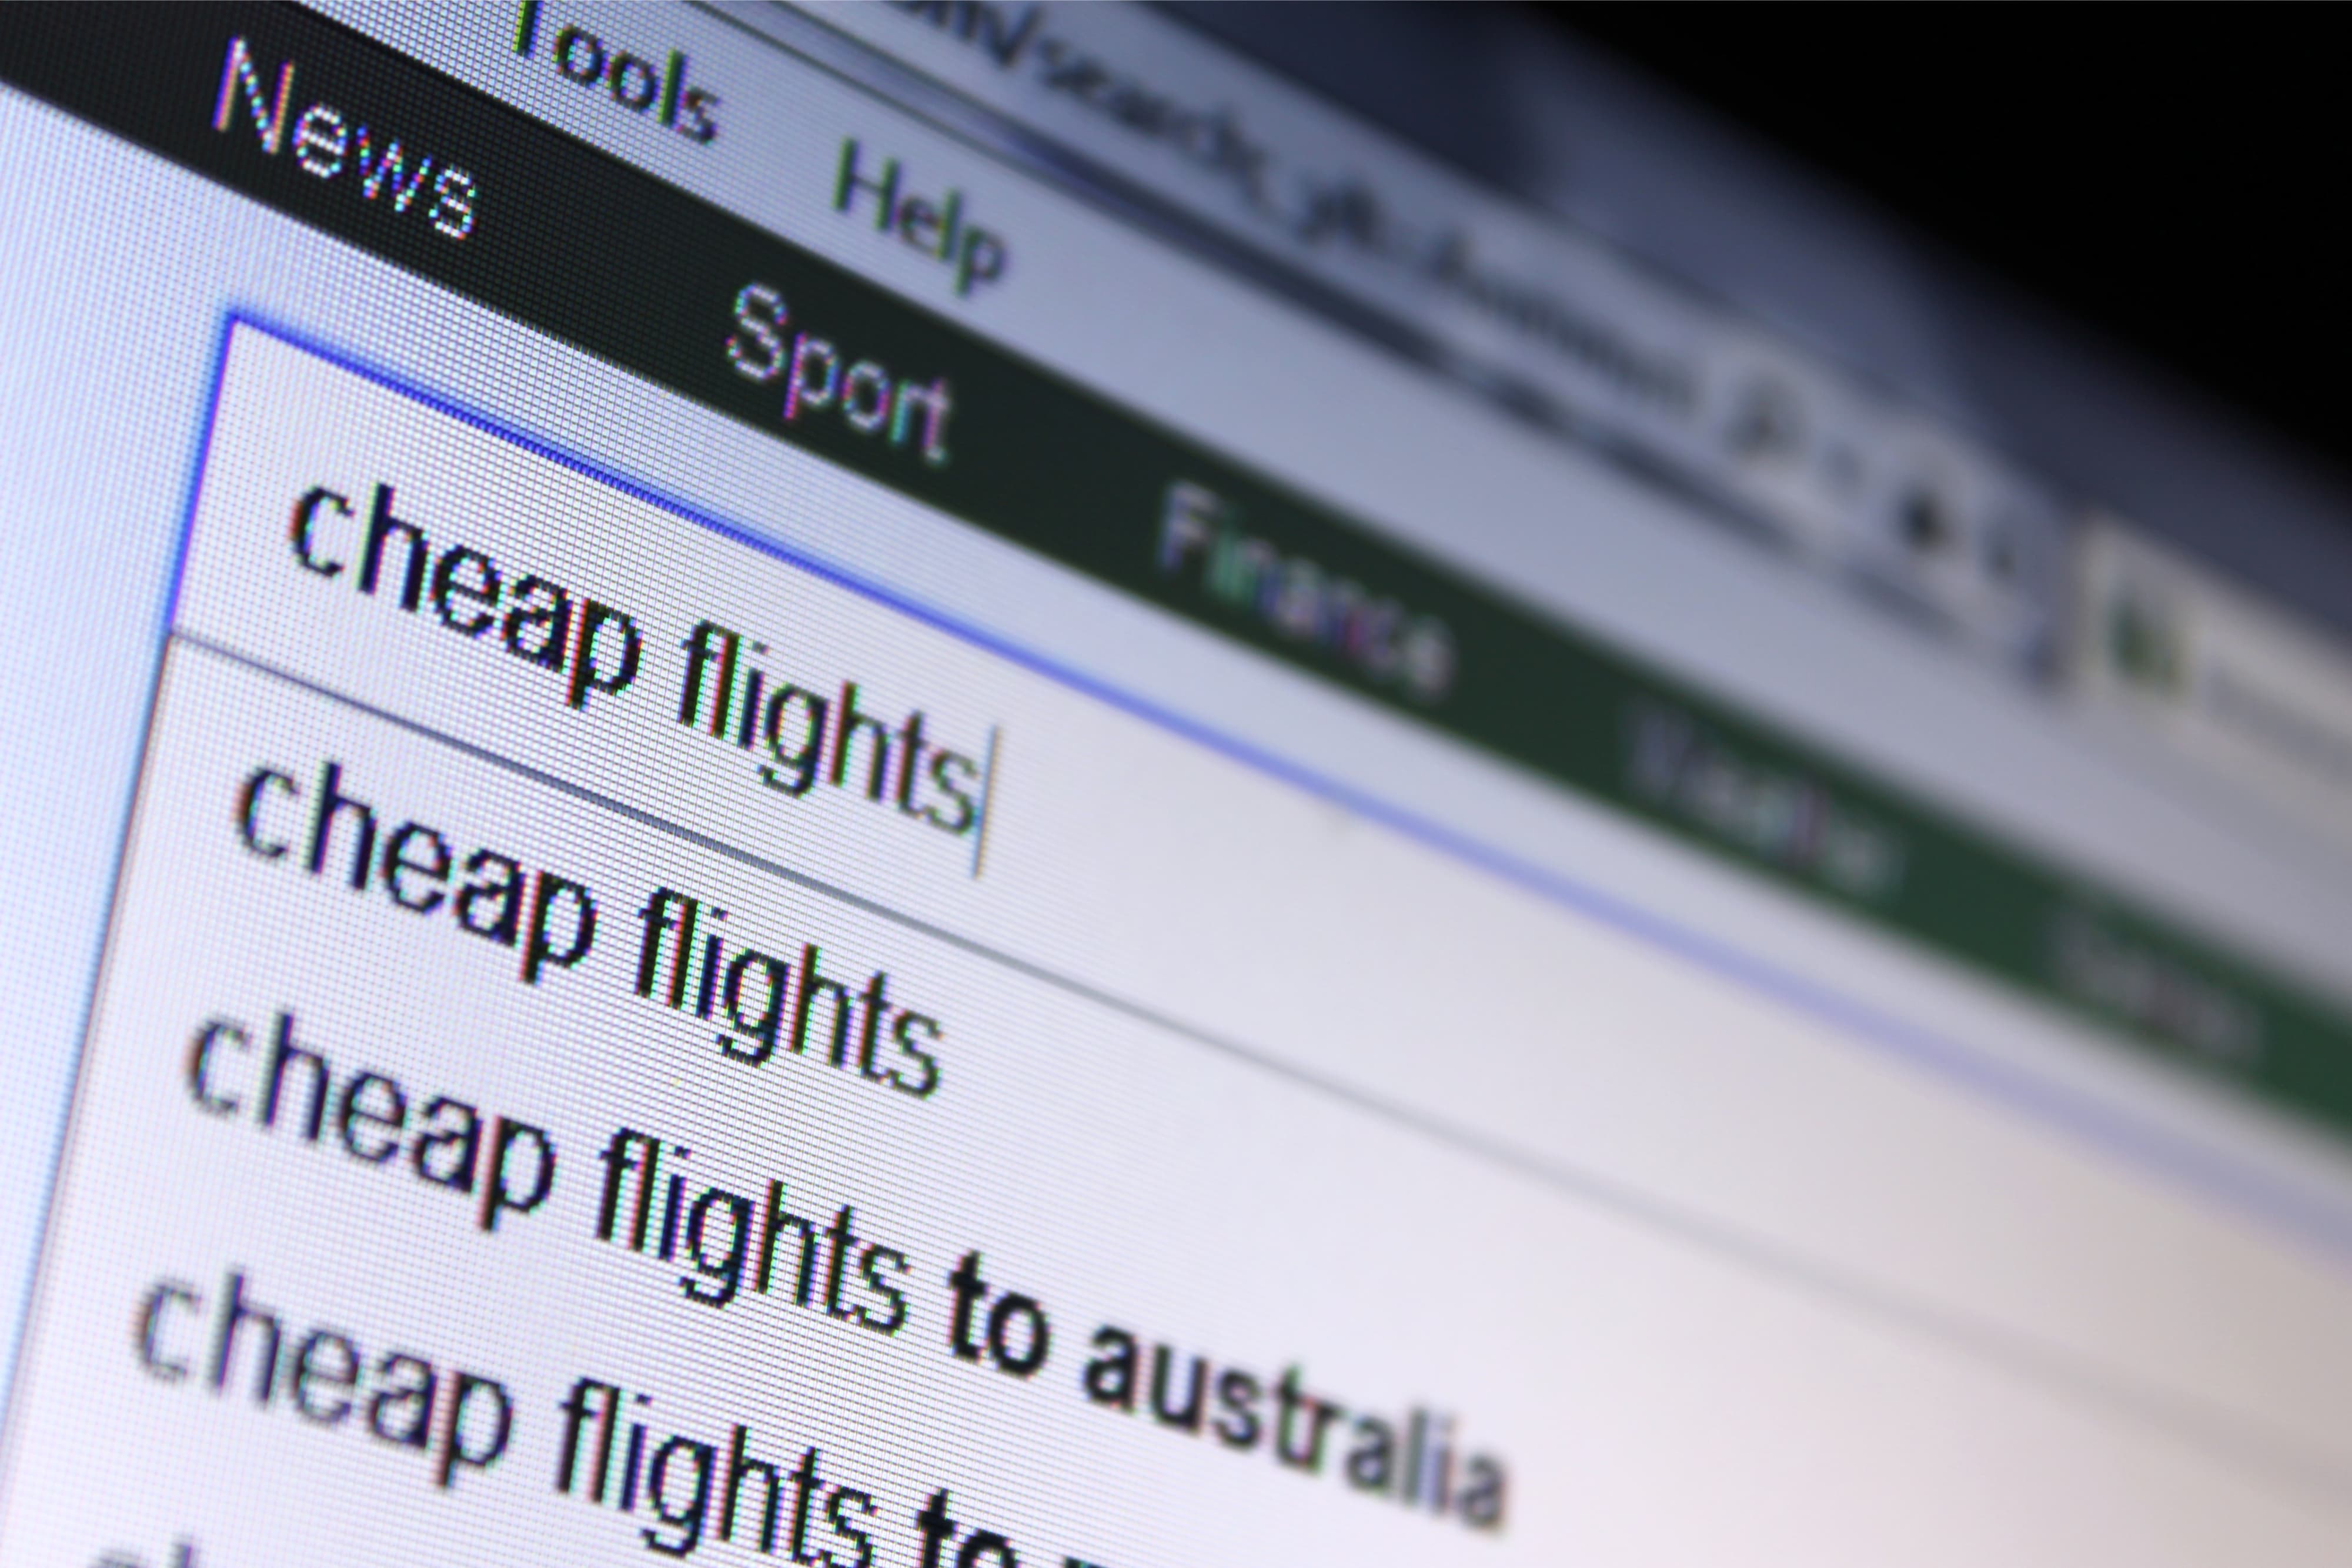 A closeup view of computer screen with text input by the computer user searching for cheap flights on internet browser search engine page